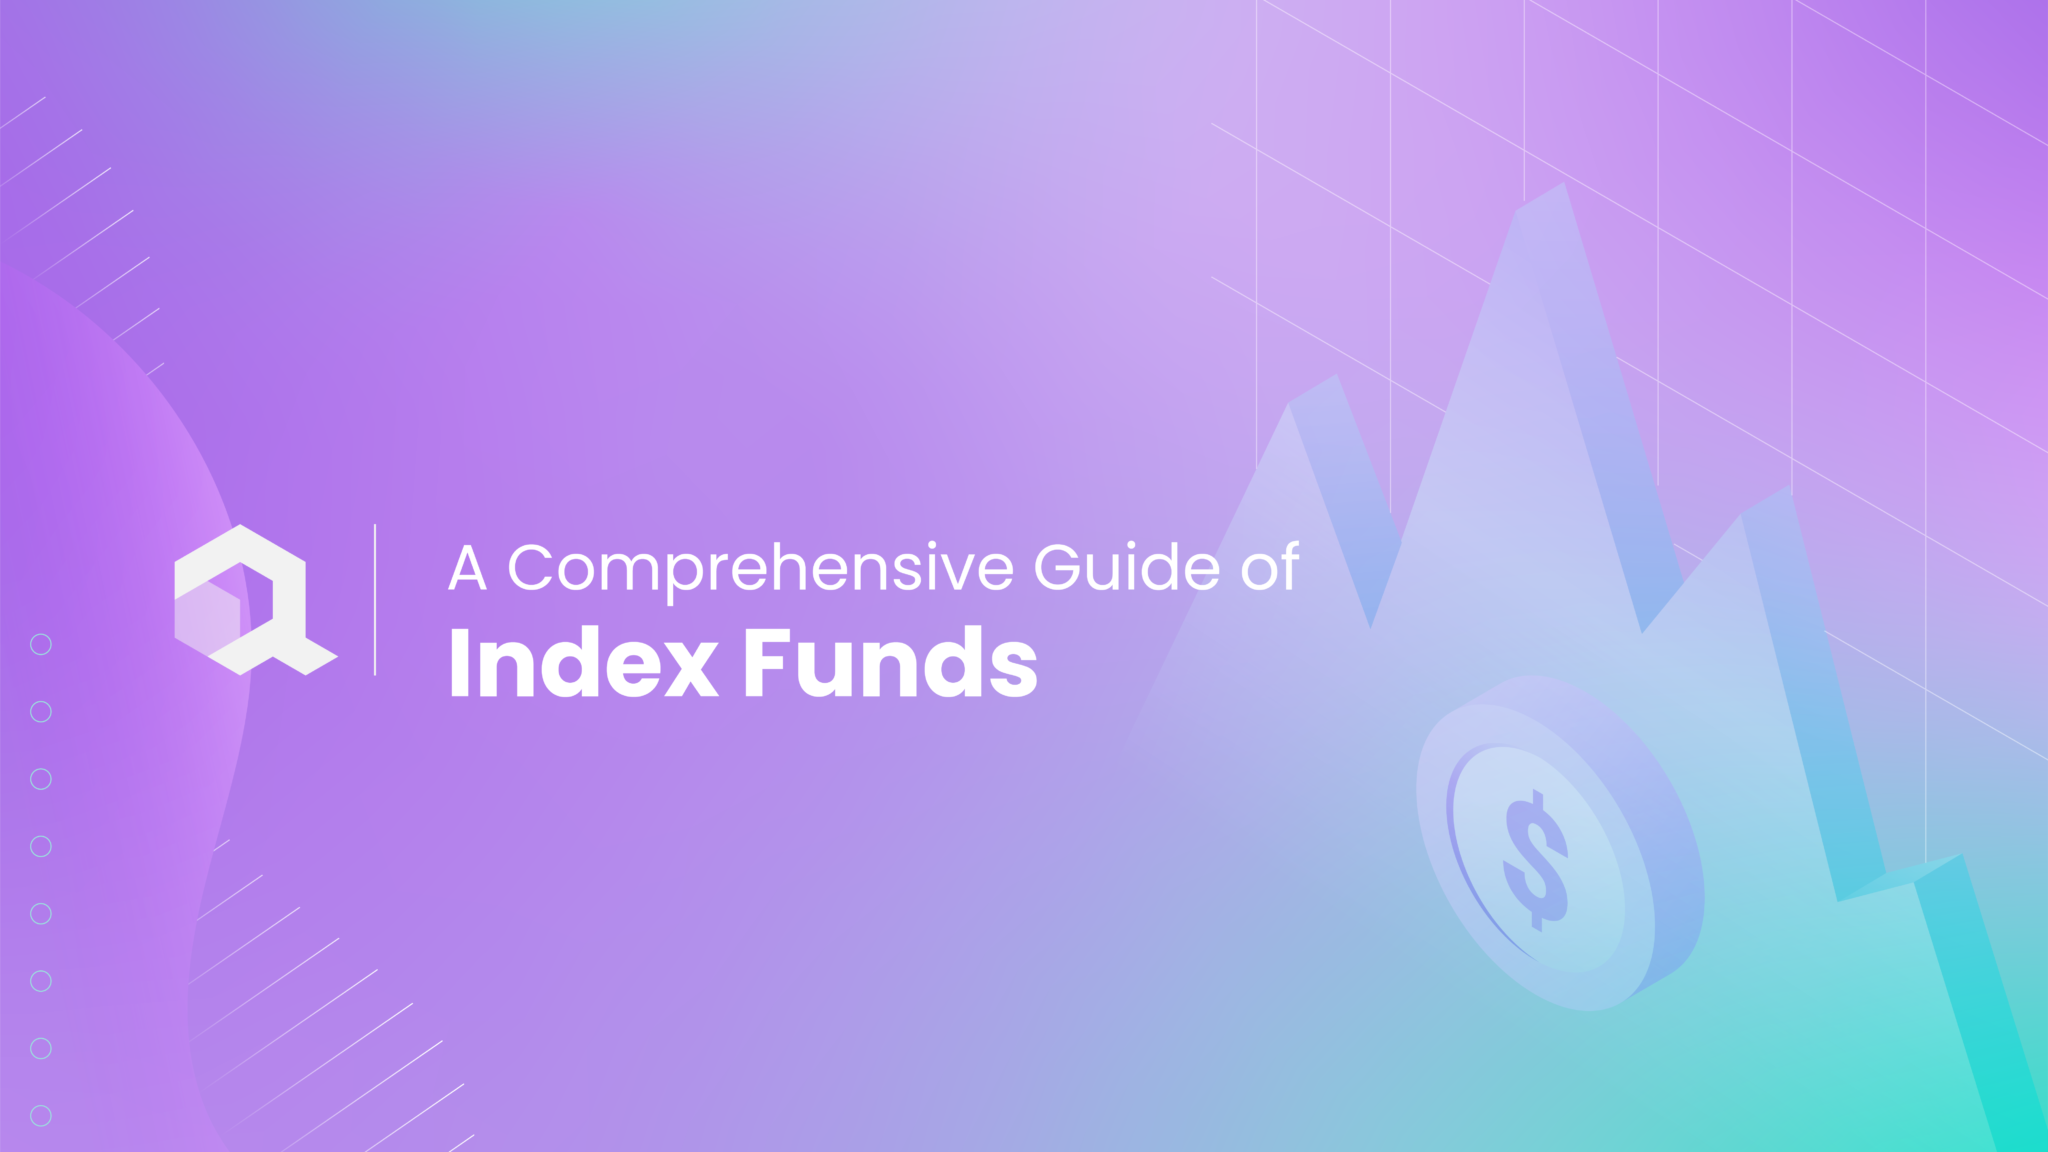 A Comprehensive Guide of Index Funds